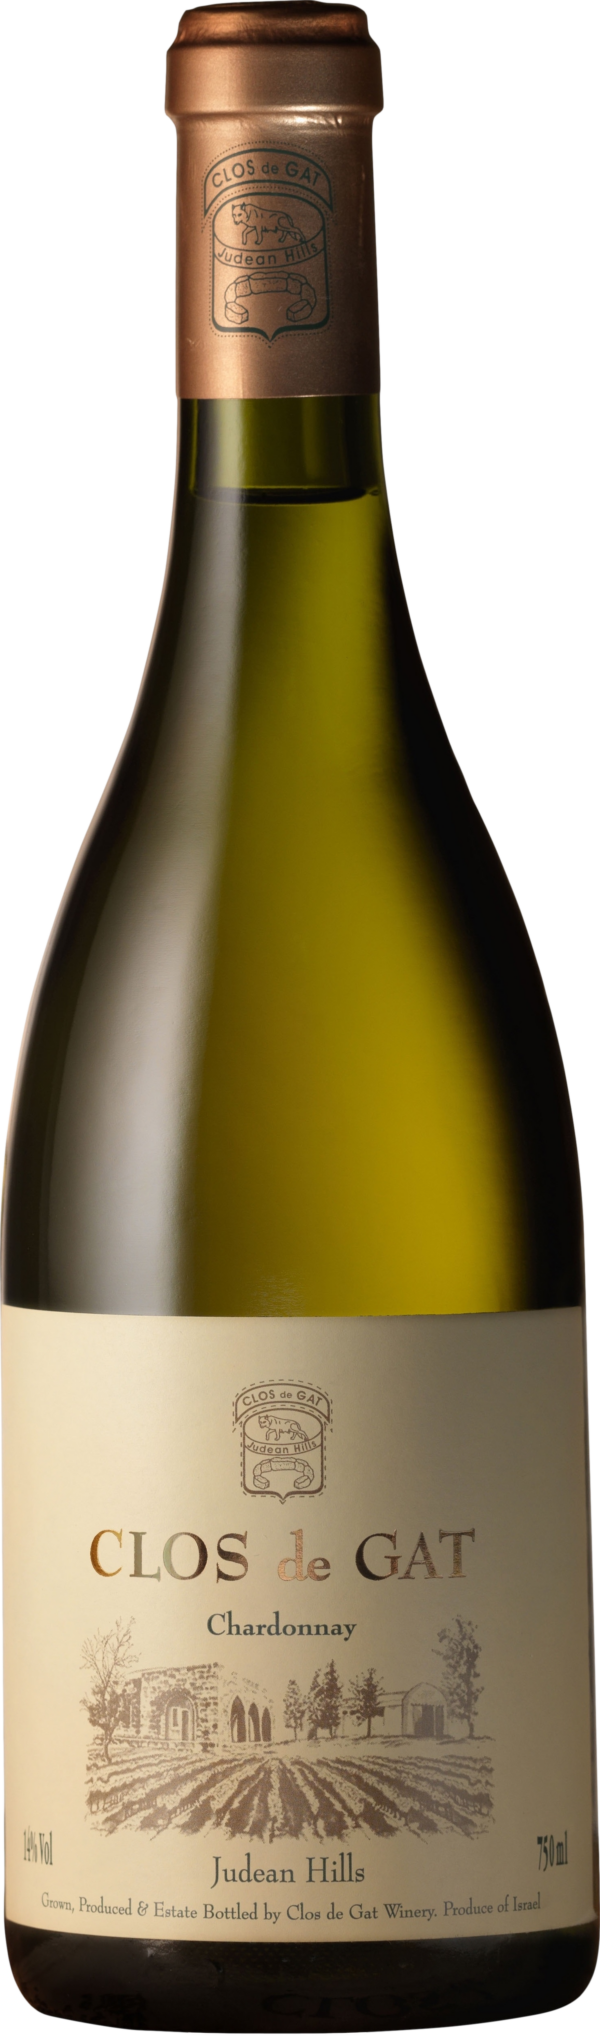 Product image of Clos de Gat Chardonnay 2021 from 8wines